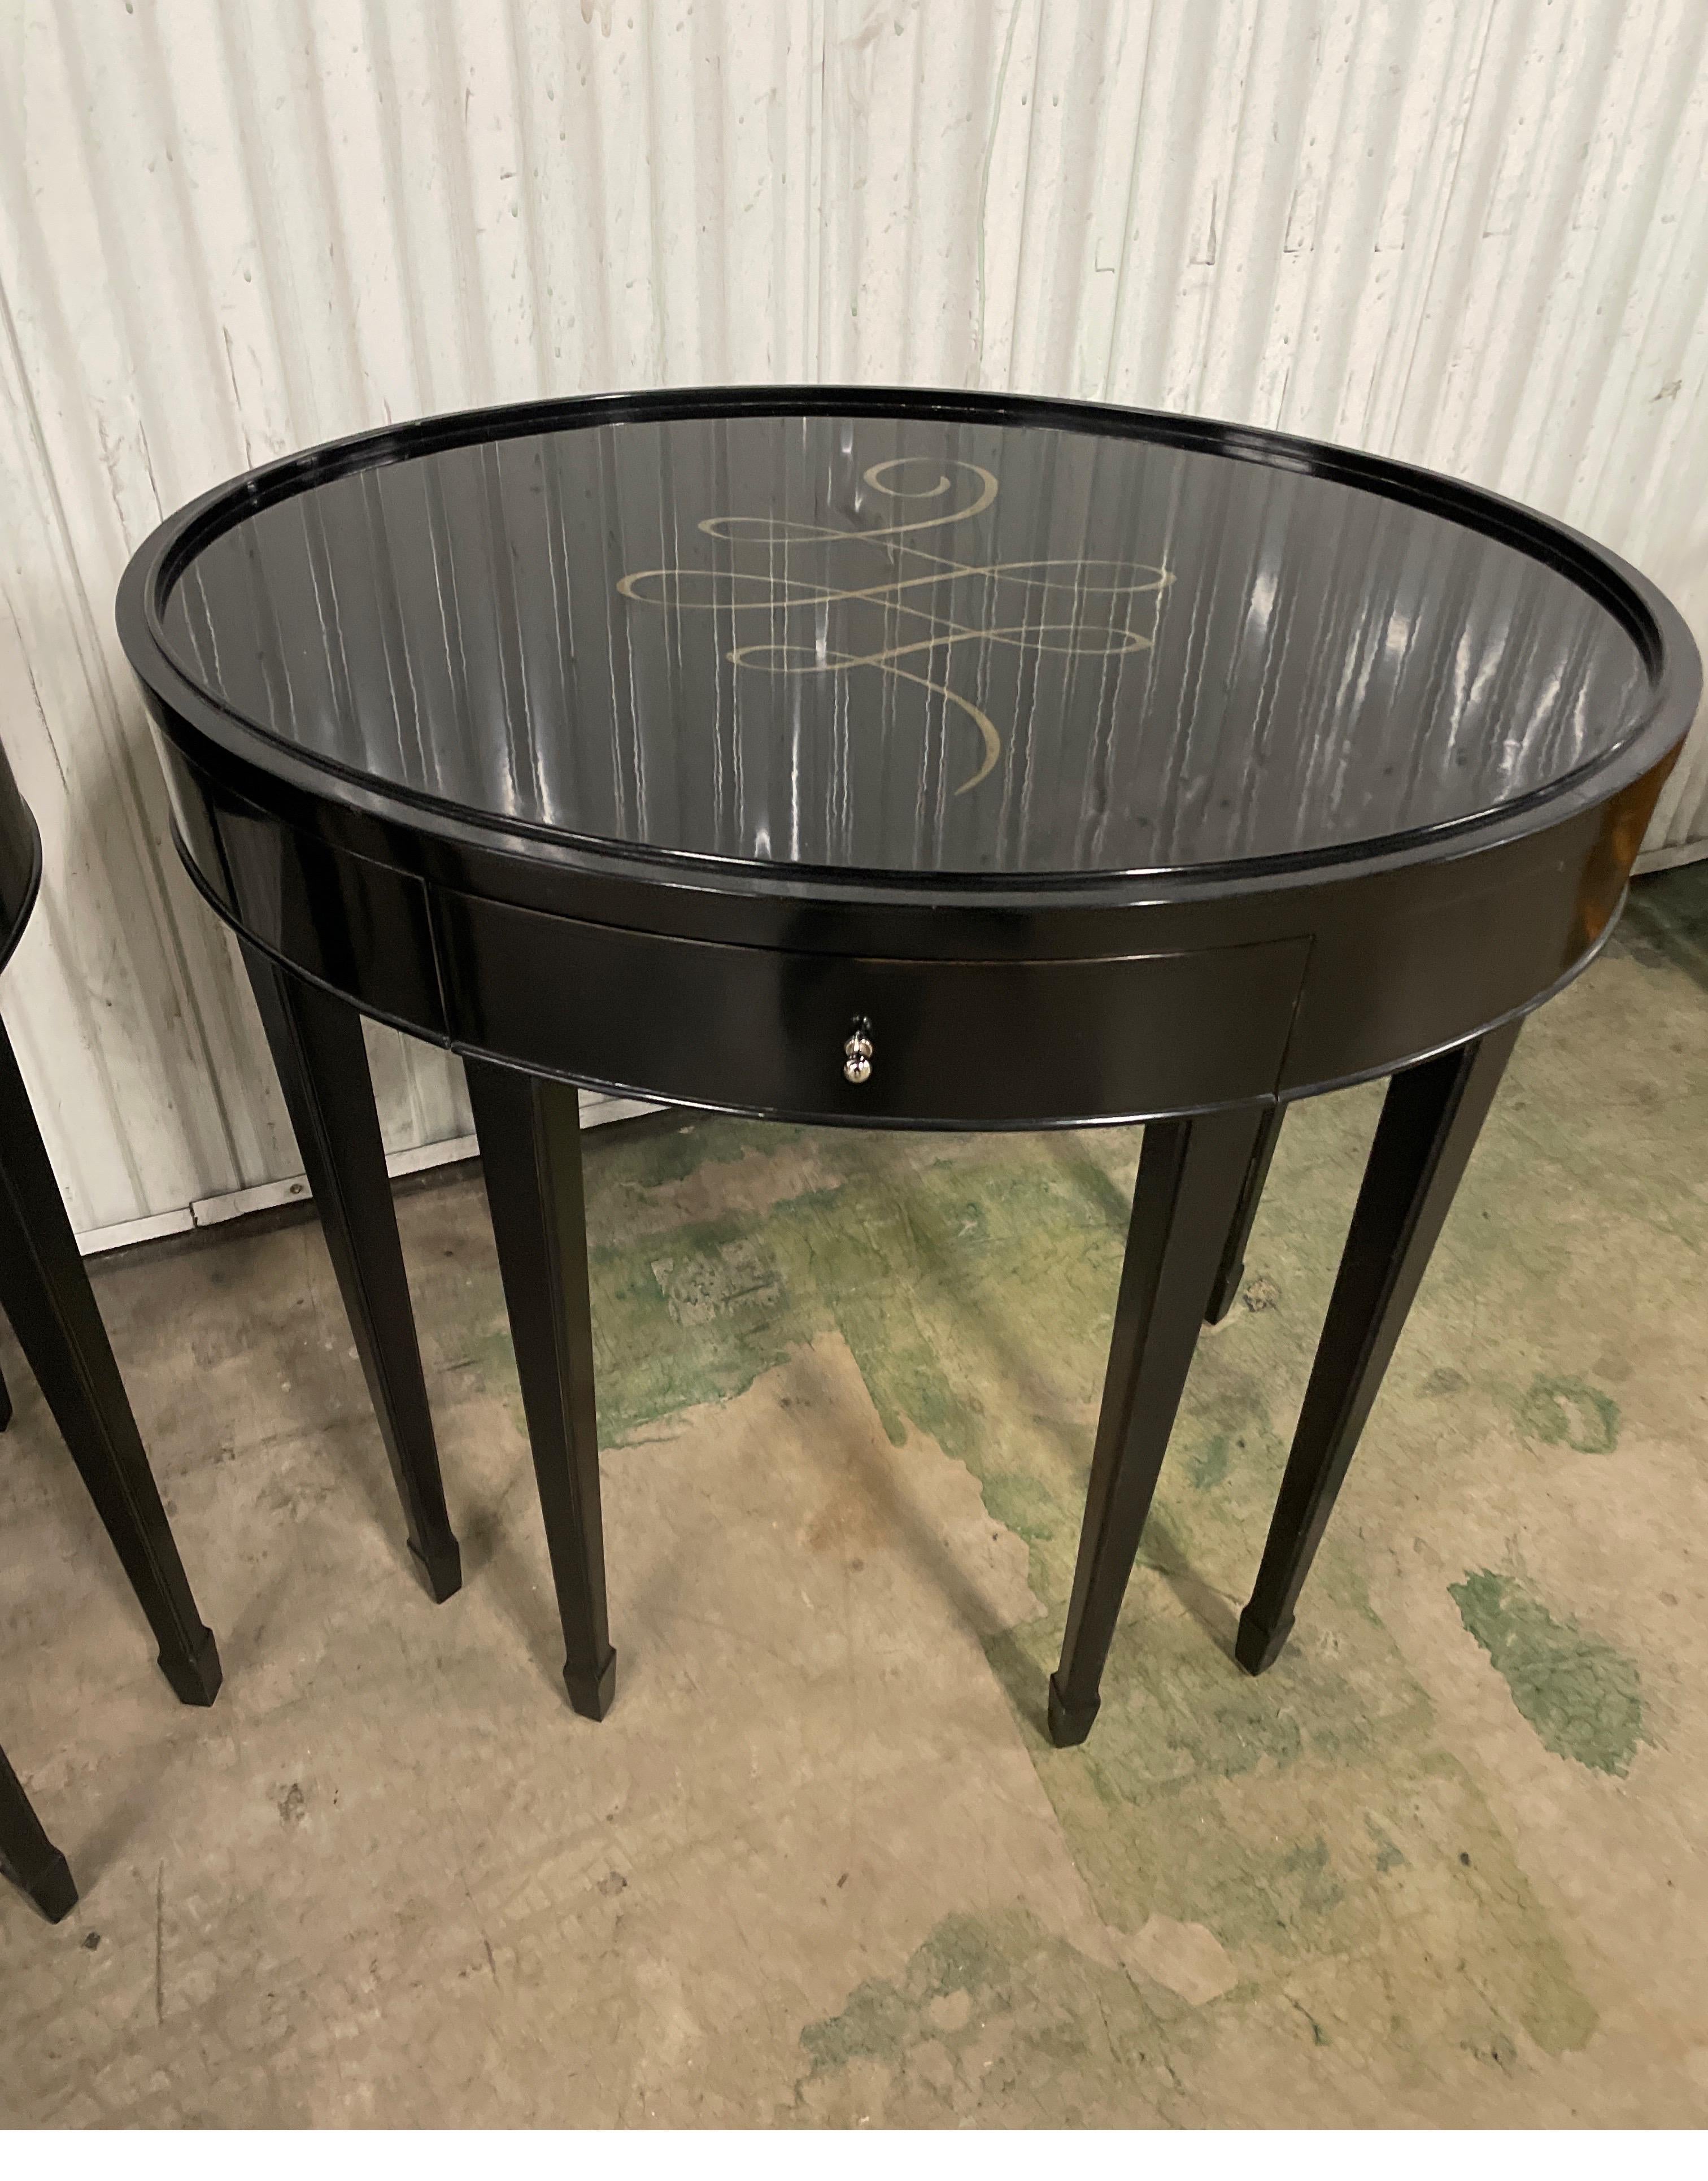 20th Century Pair of Black Lacquered Oval End Tables by Barbara Barry for Baker